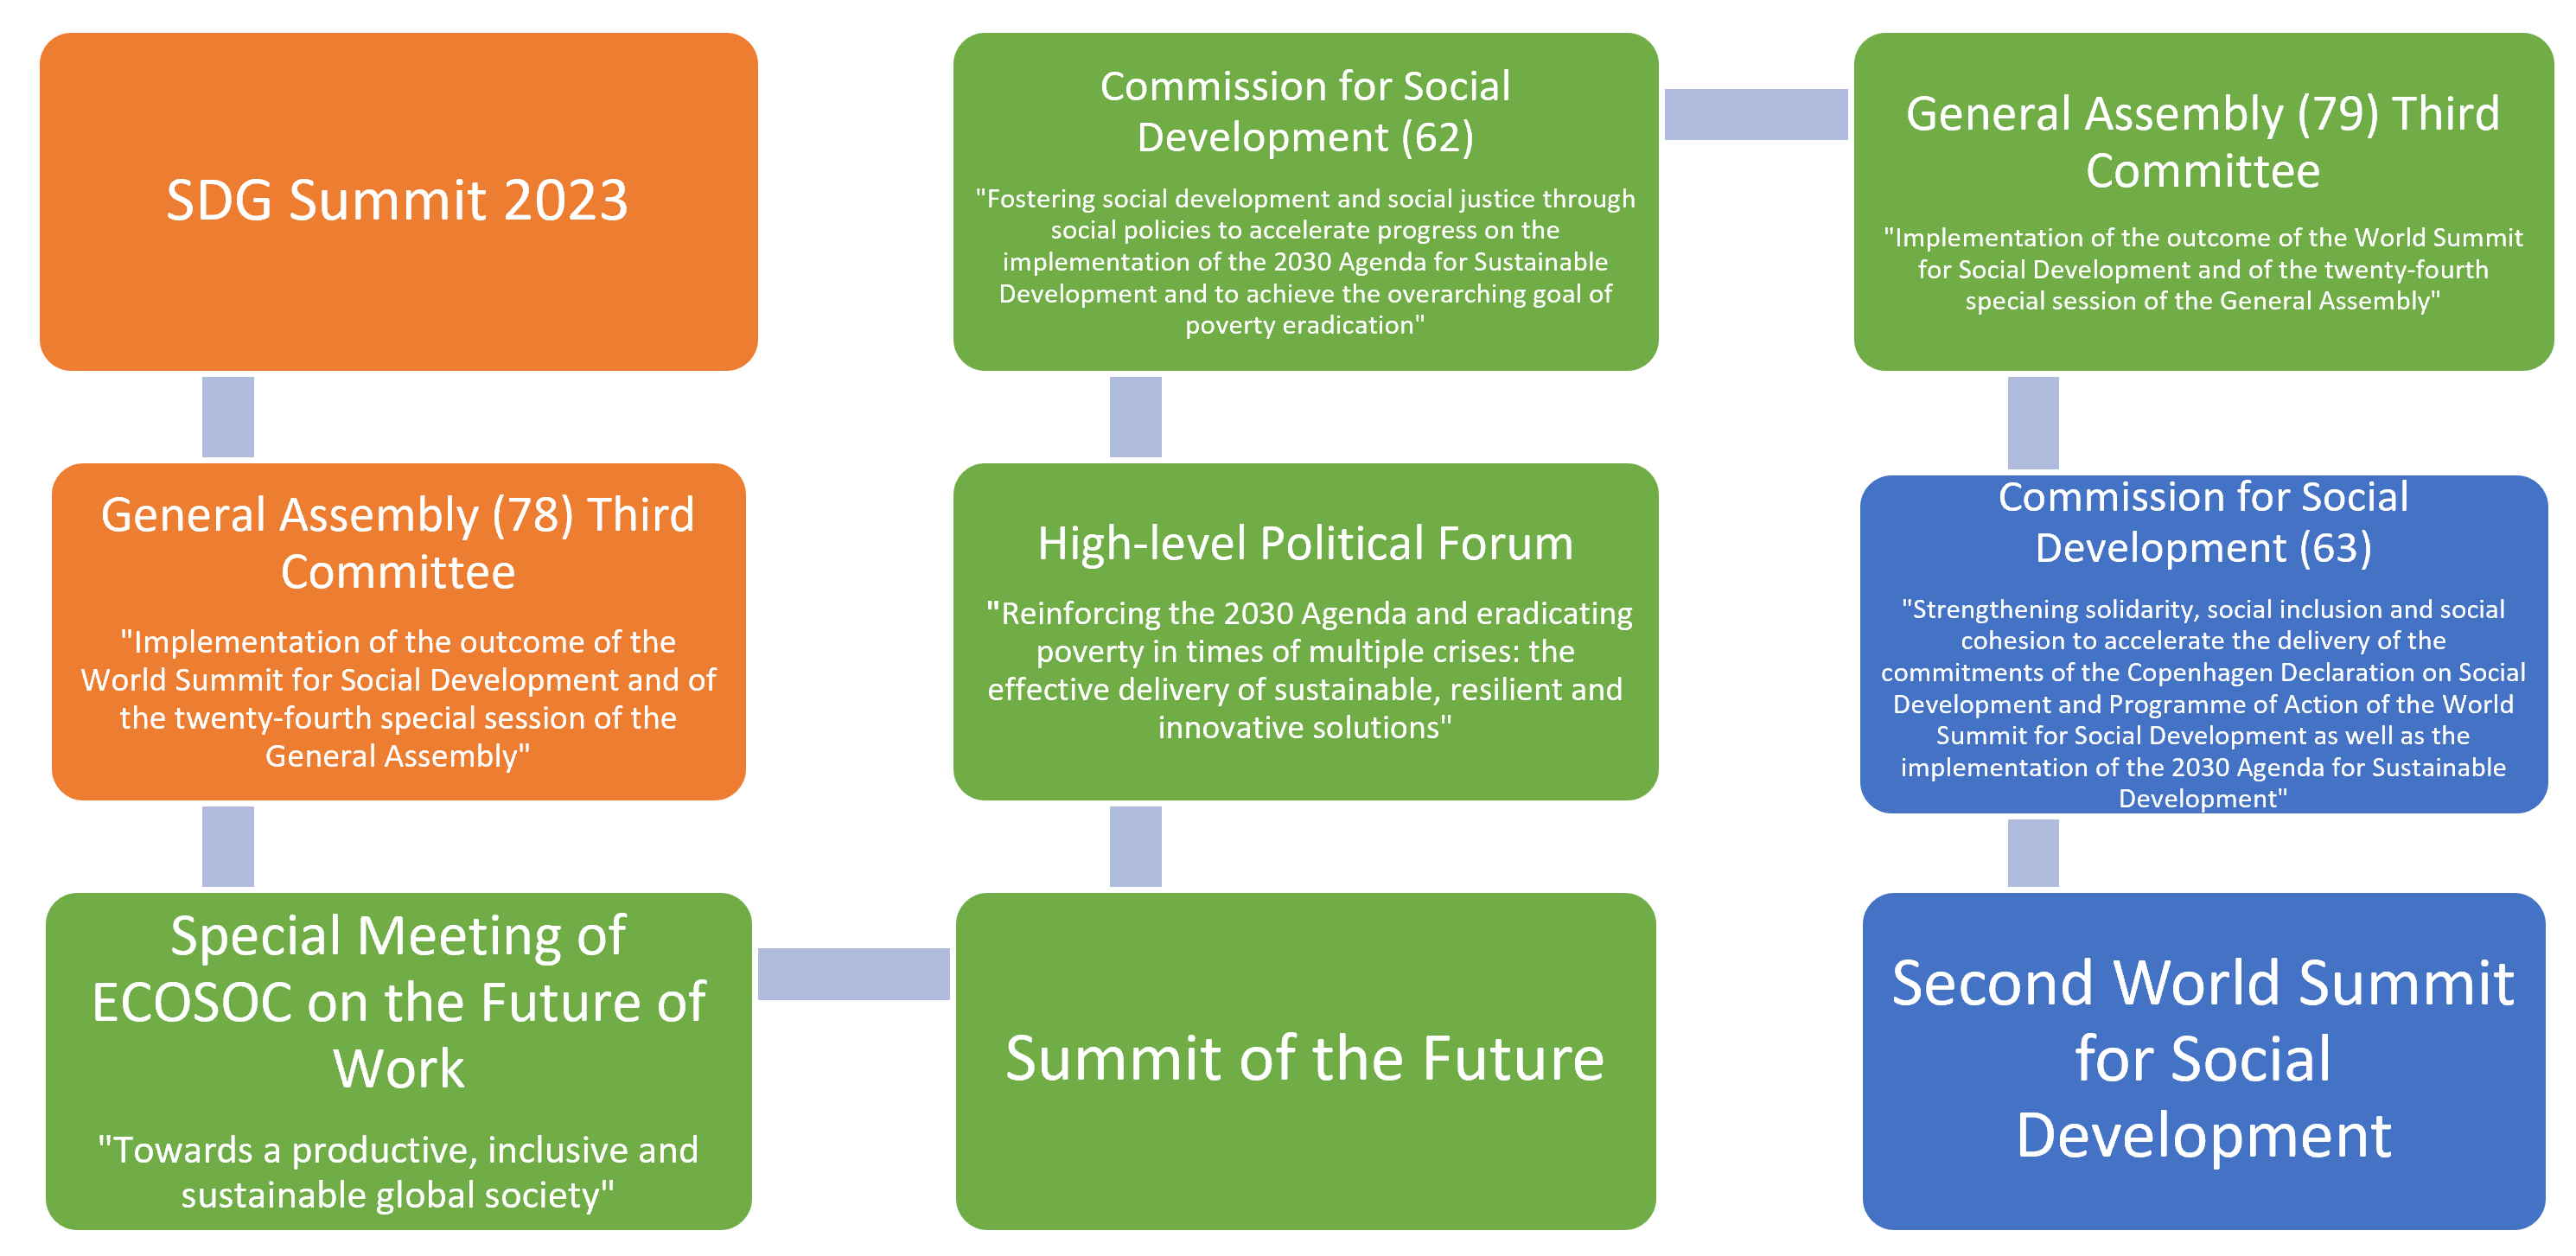 Recent intergovernmental contributions to the Second World Summit for Social Development 